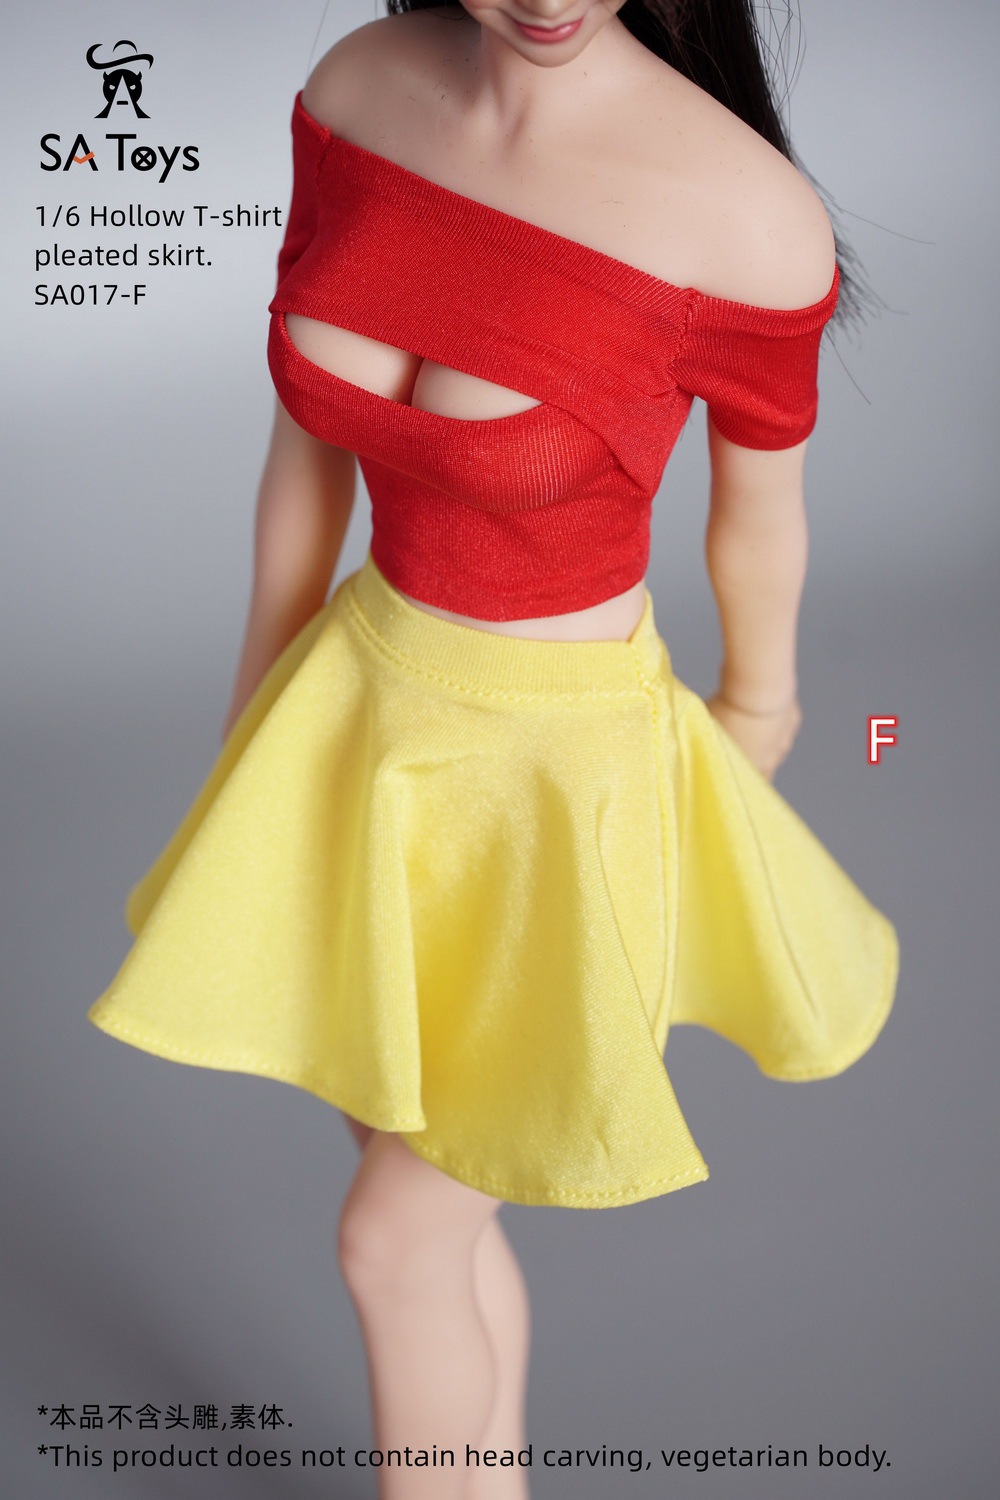 T-shirtpleatedskirt - NEW PRODUCT: SA Toys: 1/6 Personalized Poster Style Tight Dress/ Hollow T-shirt Pleated Skirt/Side Zipper Tight Skirt [Various styles available]  16560610